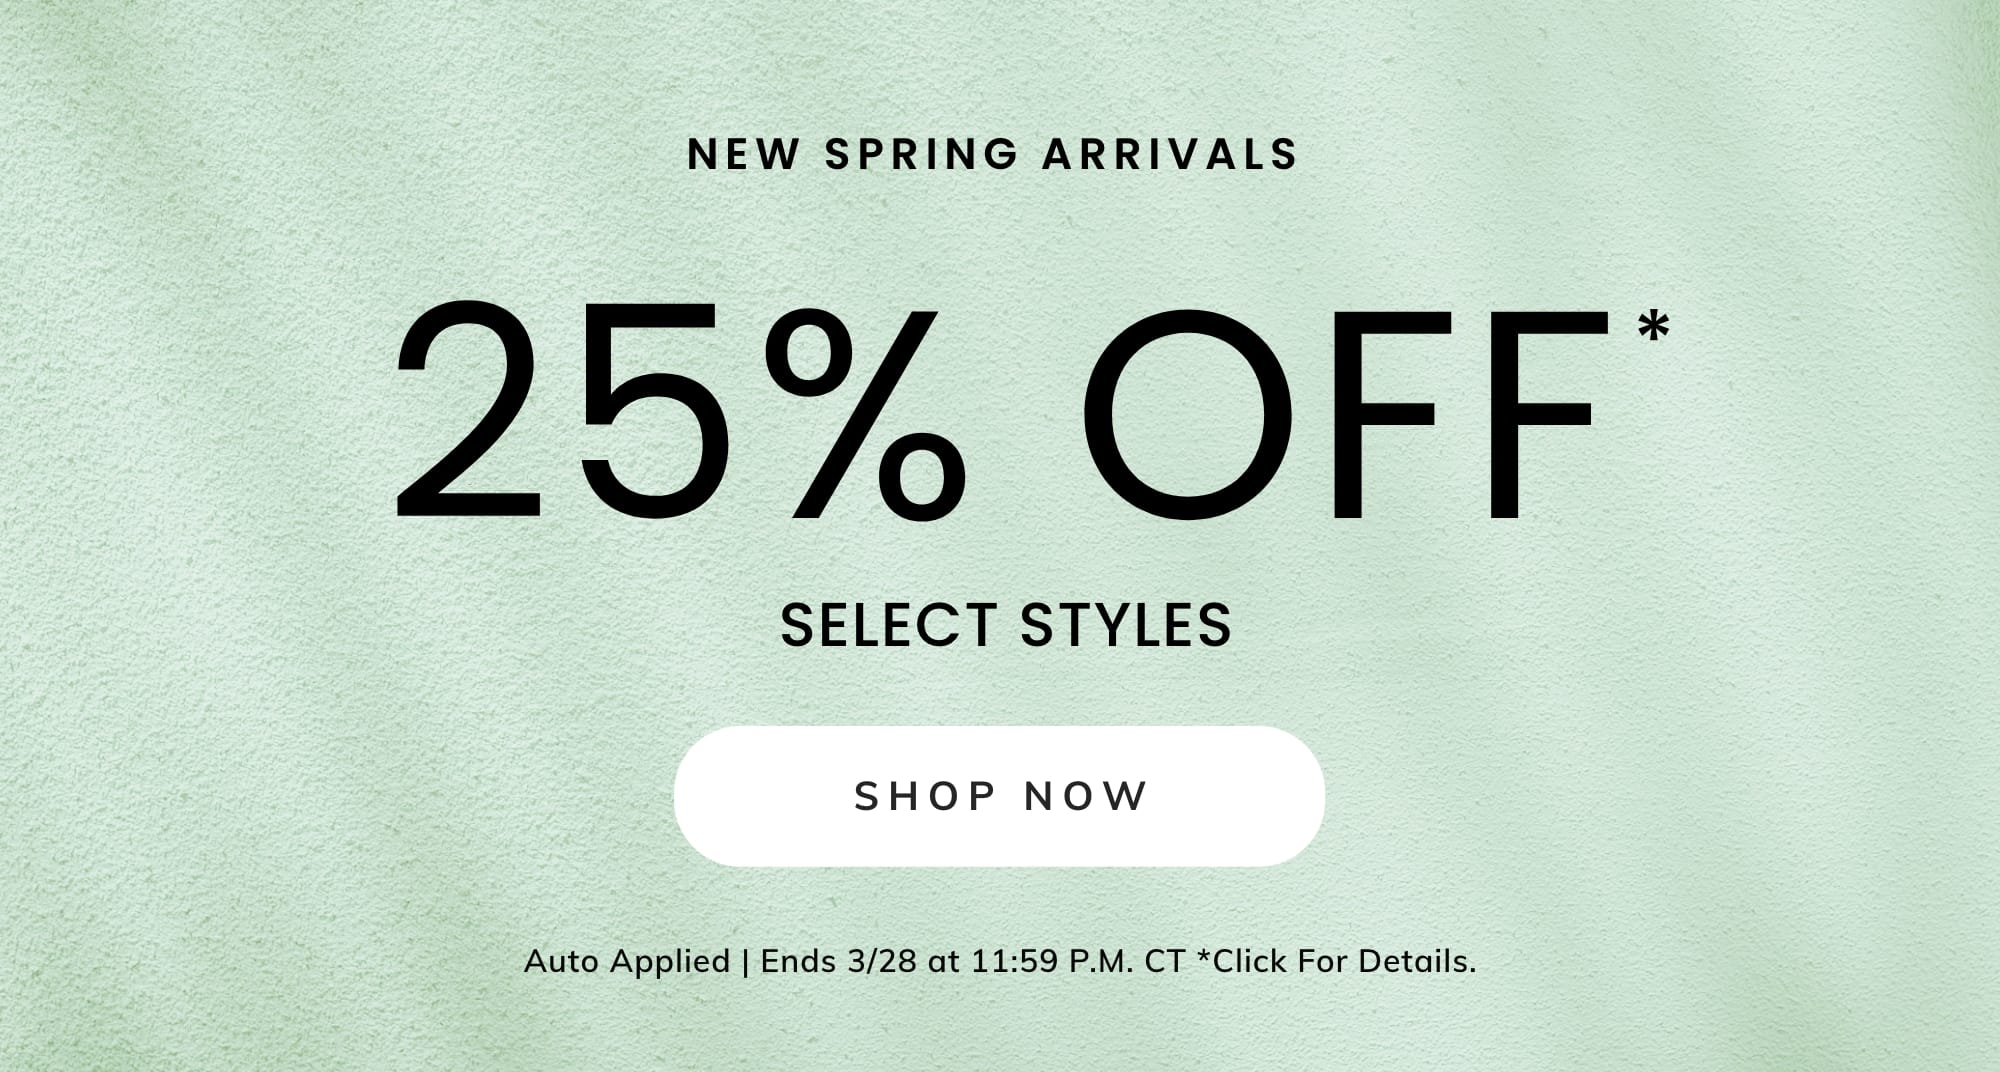 25% OFF* SELECT STYLES